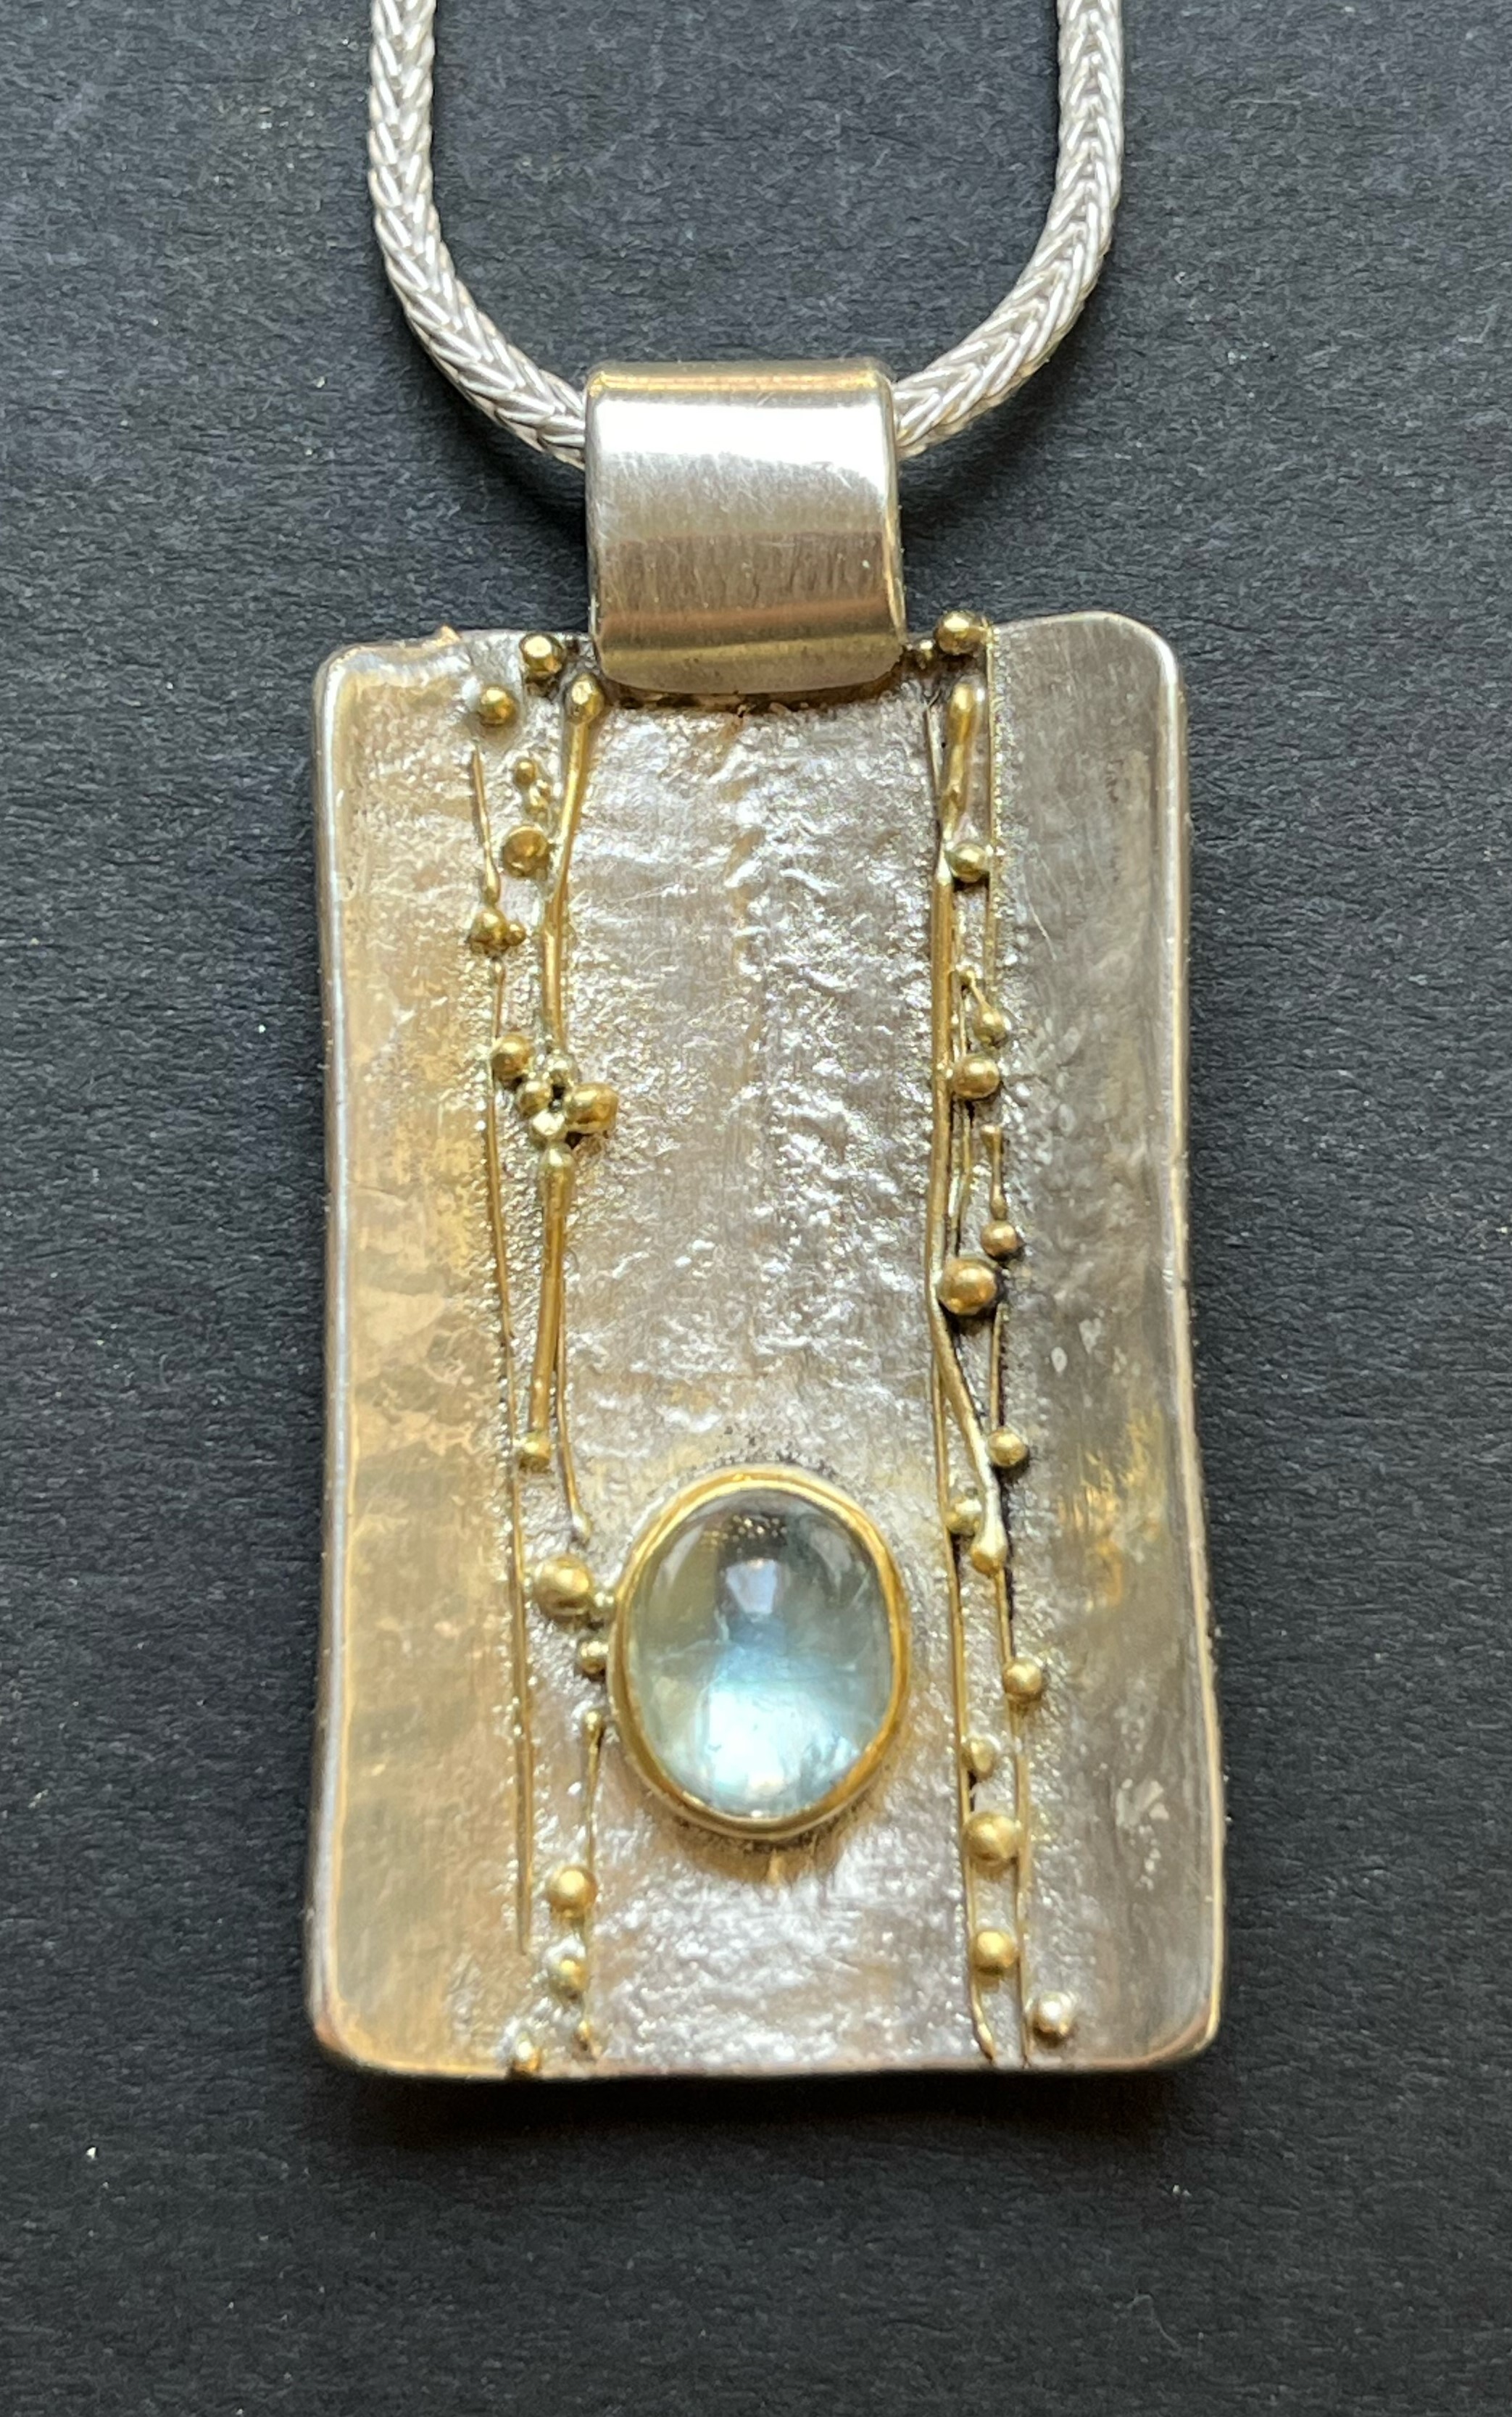 Waterfall Necklace 38x25 mm Sterling Silver, 22k Gold Aquamarine, 8x6mm 22